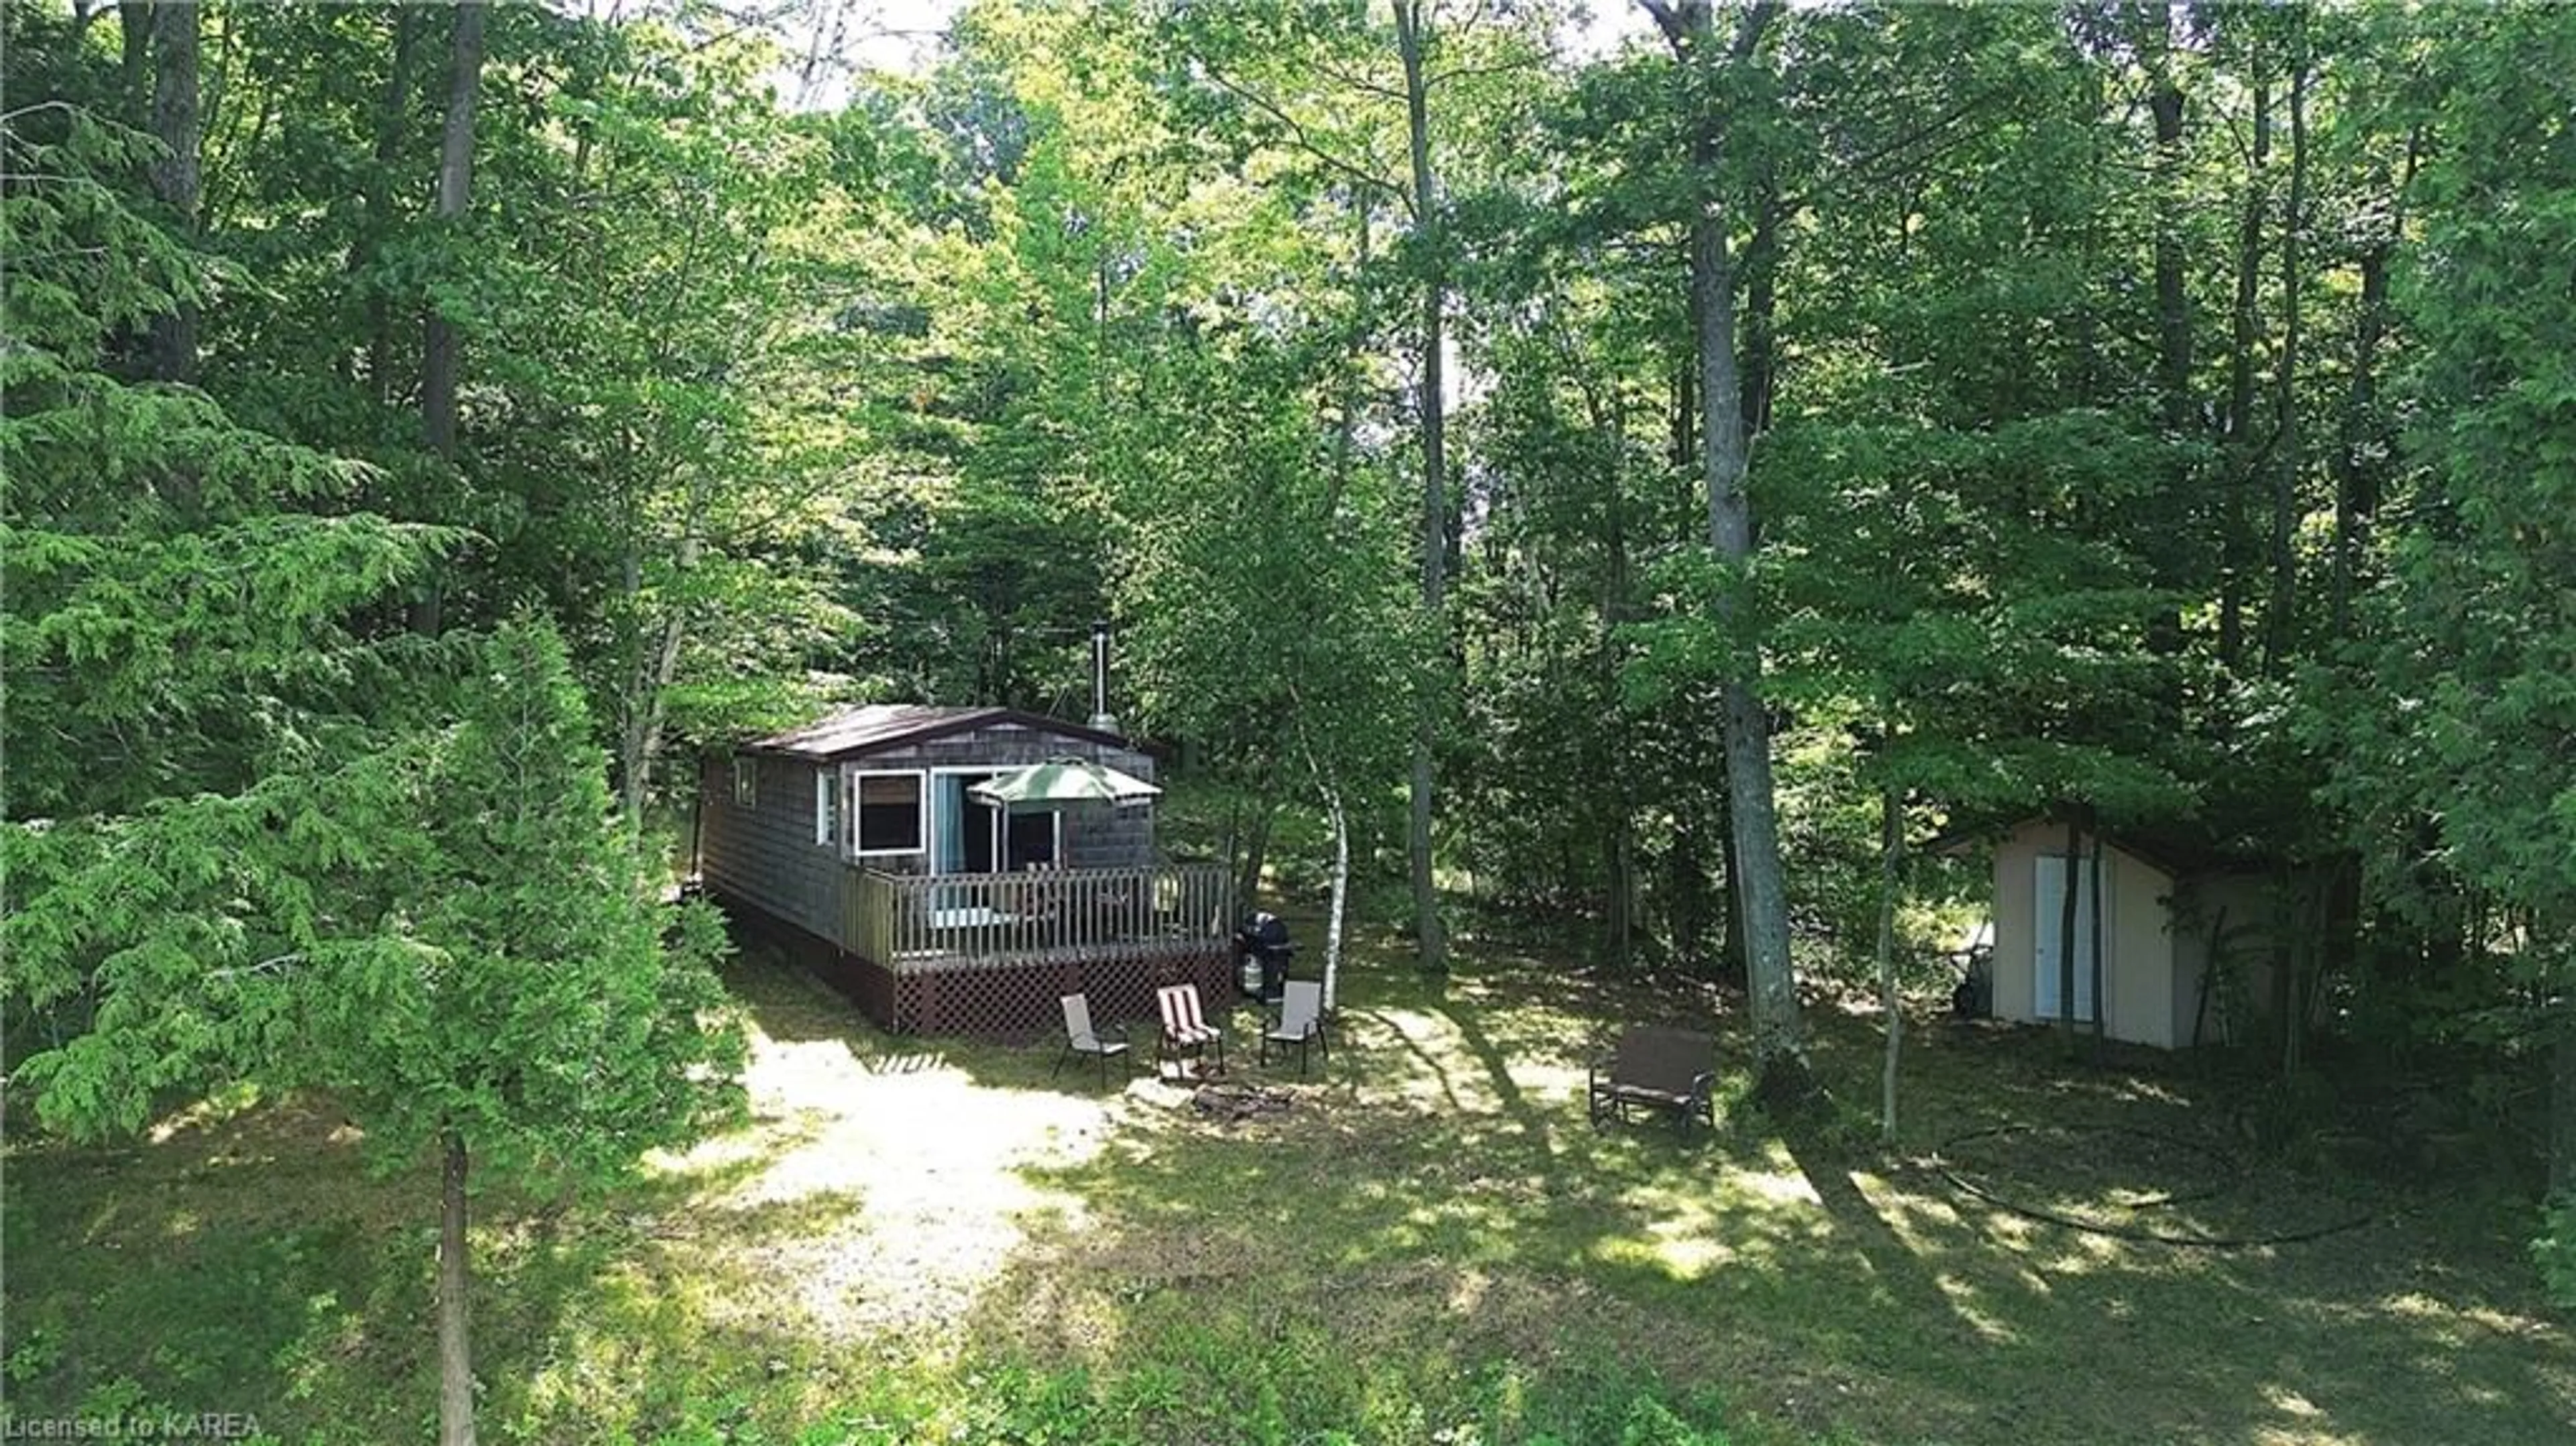 Cottage for 118 Big Stave Island, Ivy Lea Ontario K0E 1L0